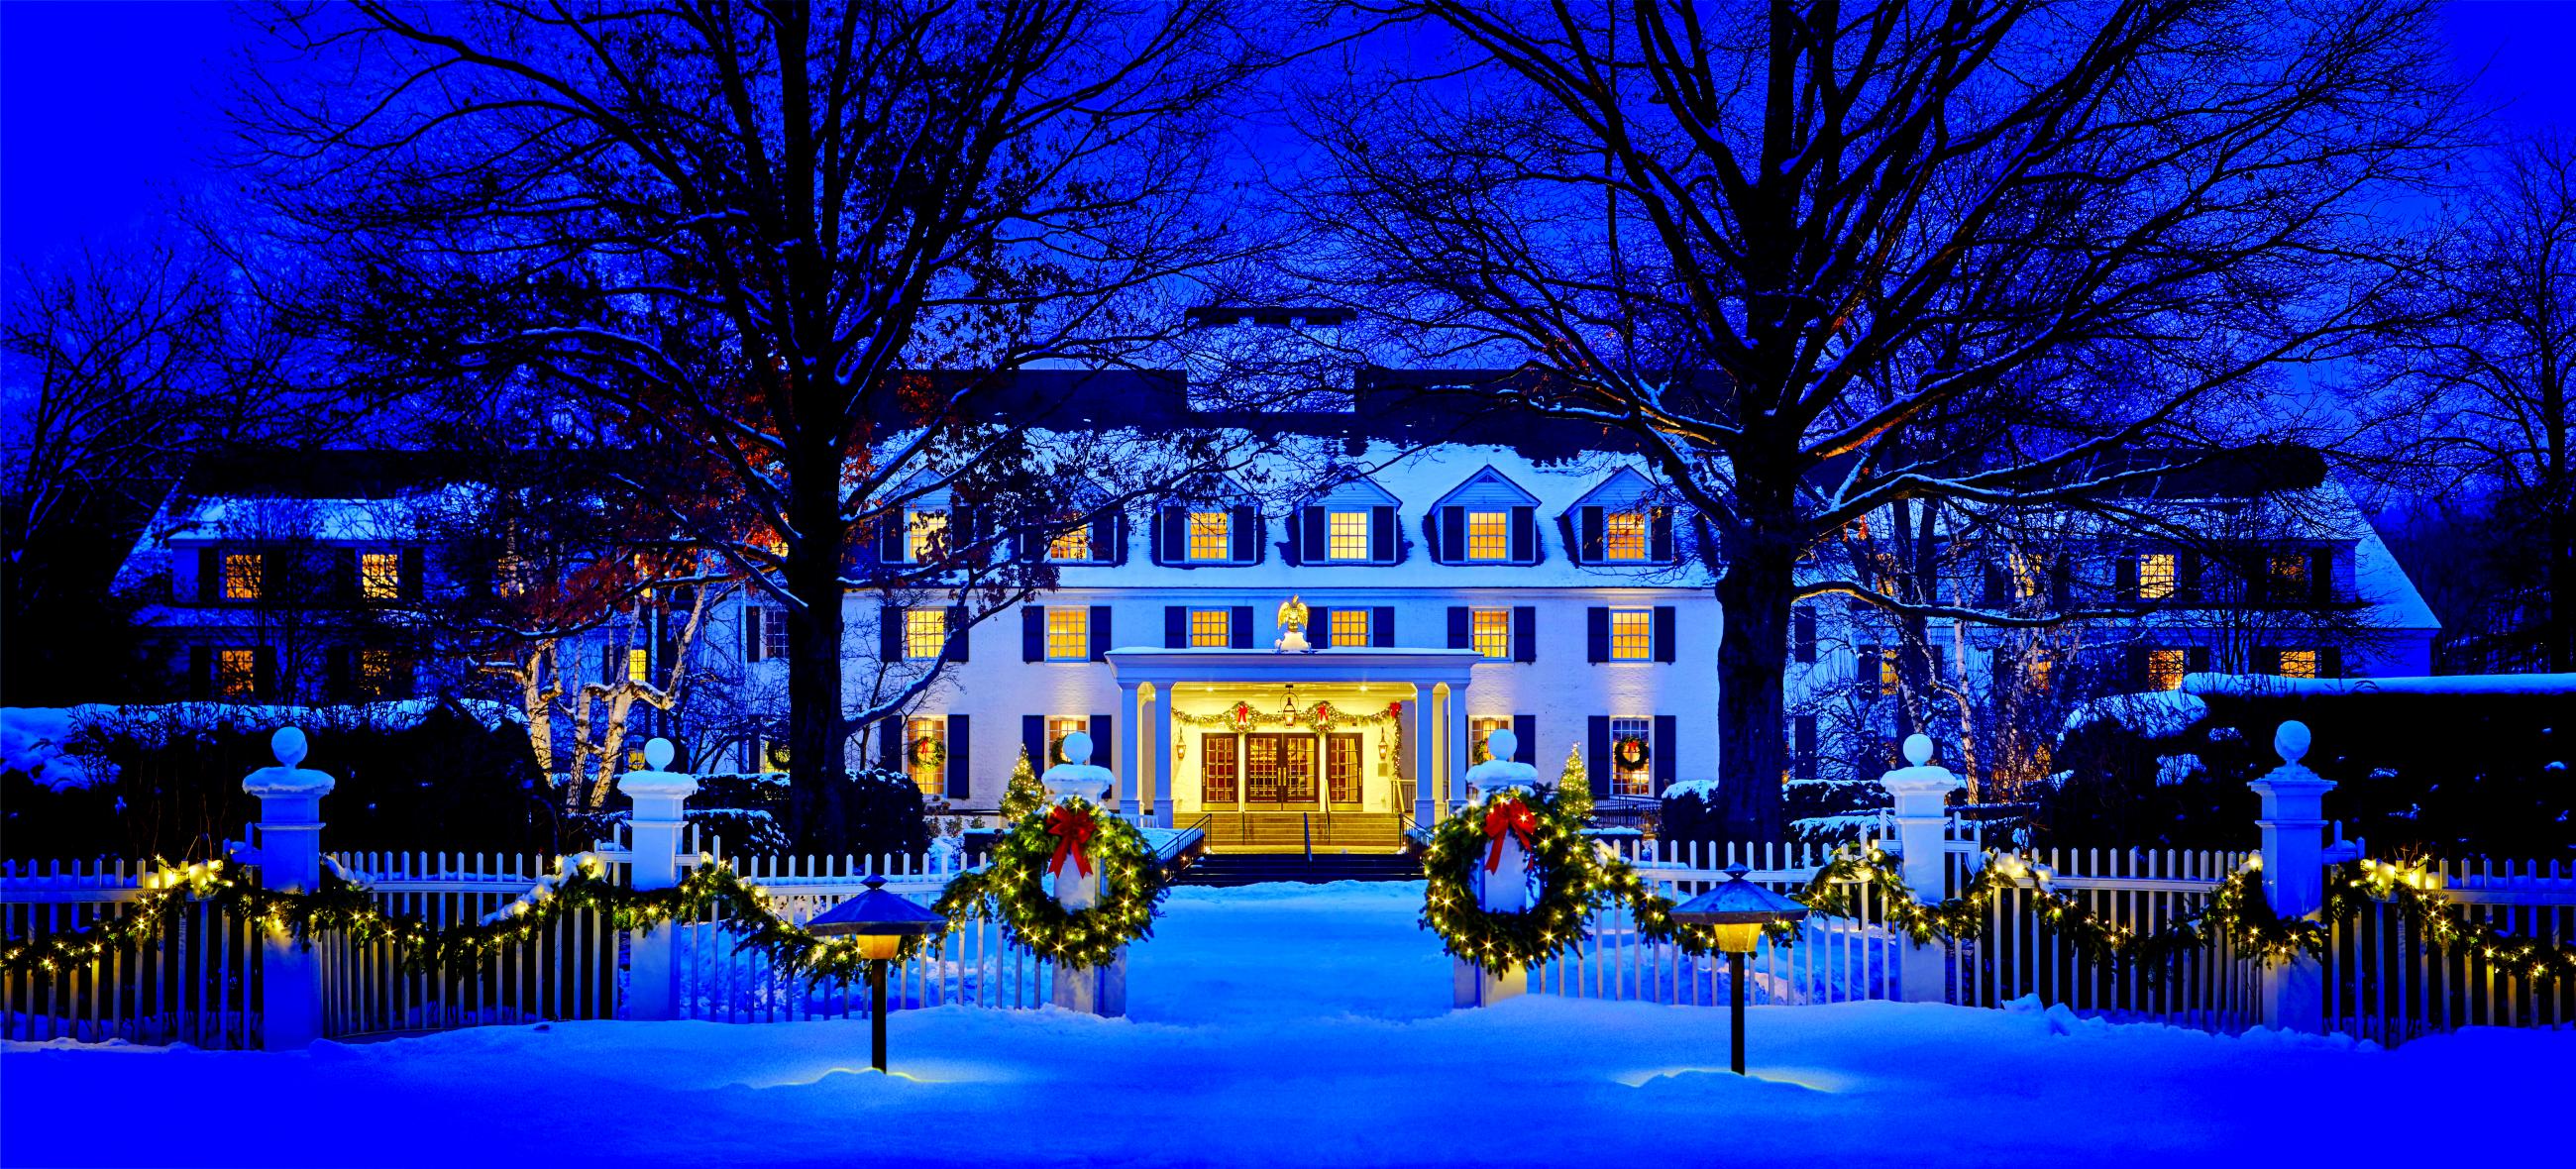 All White Winter Outfit at Woodstock Inn 10% Booking Code